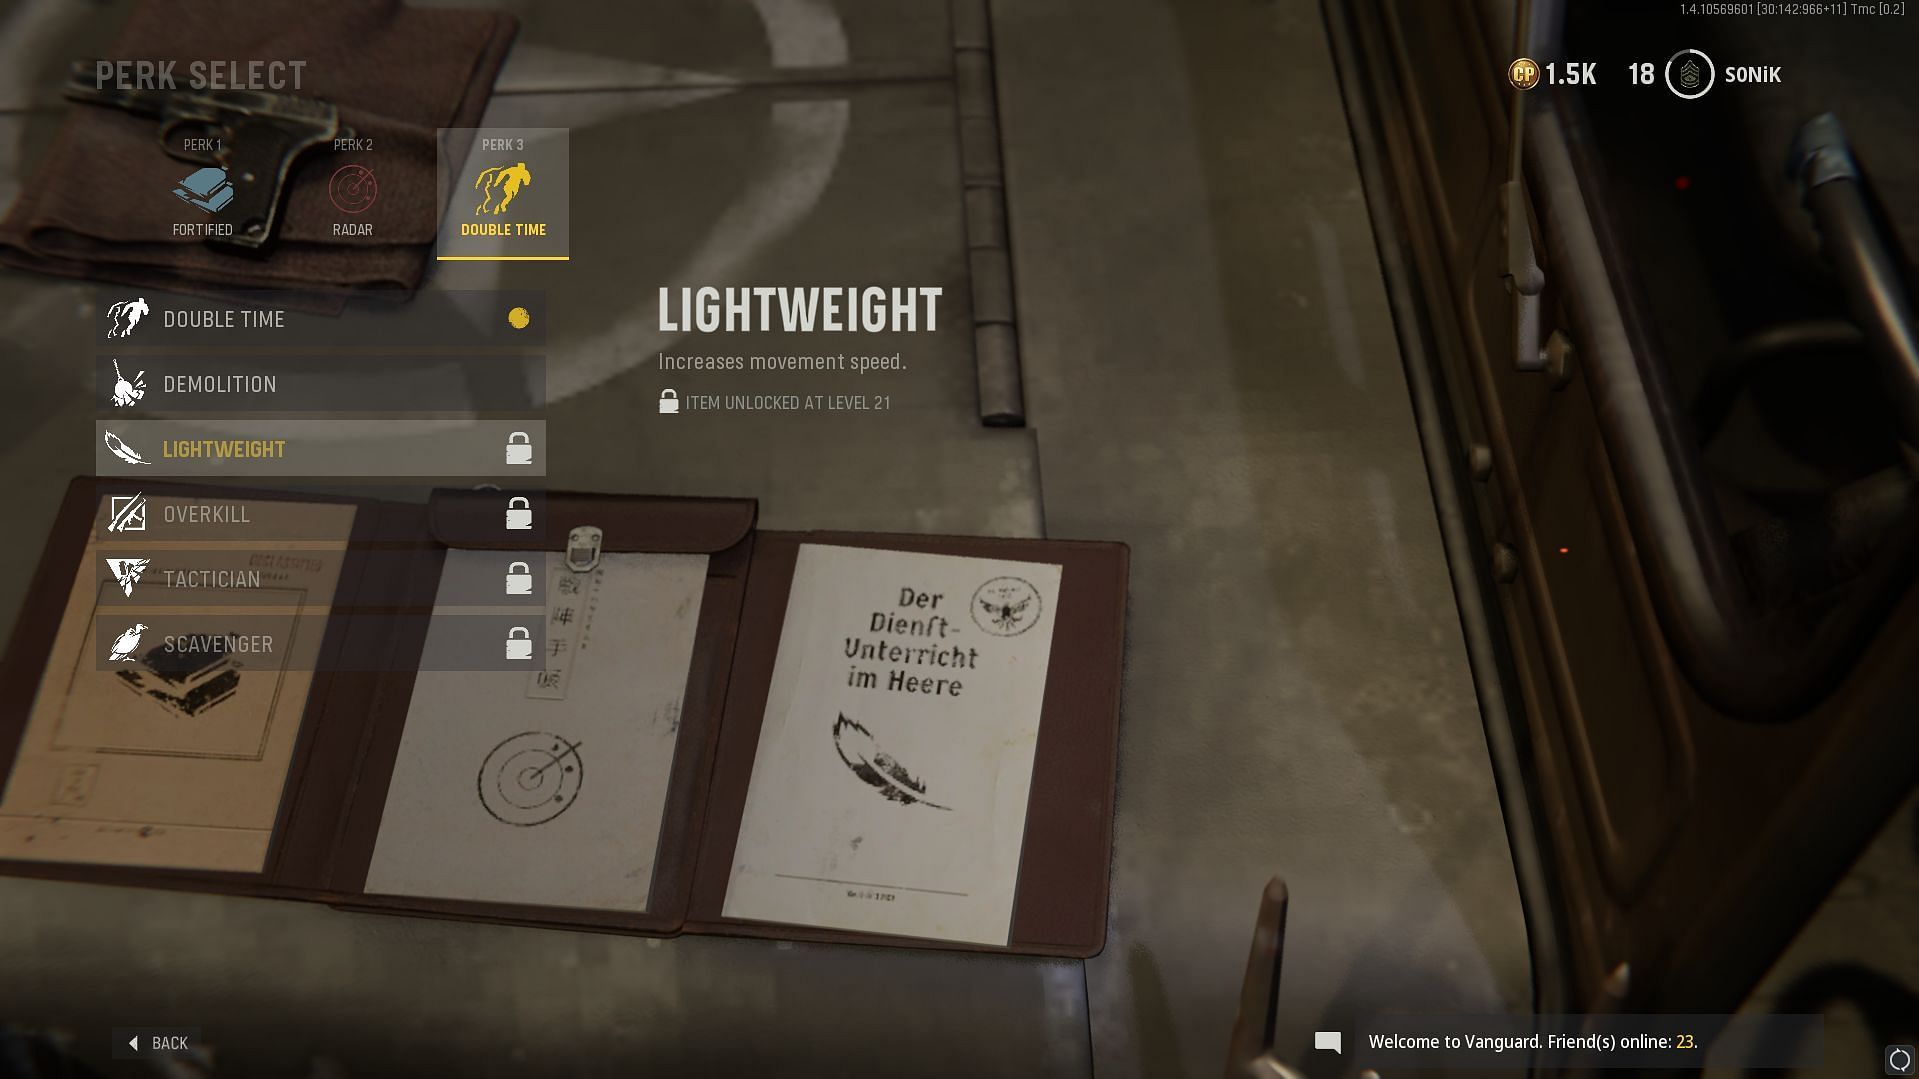 Lightweight Perk significantly increases movement speed (Screenshot via Call of Duty: Vanguard)